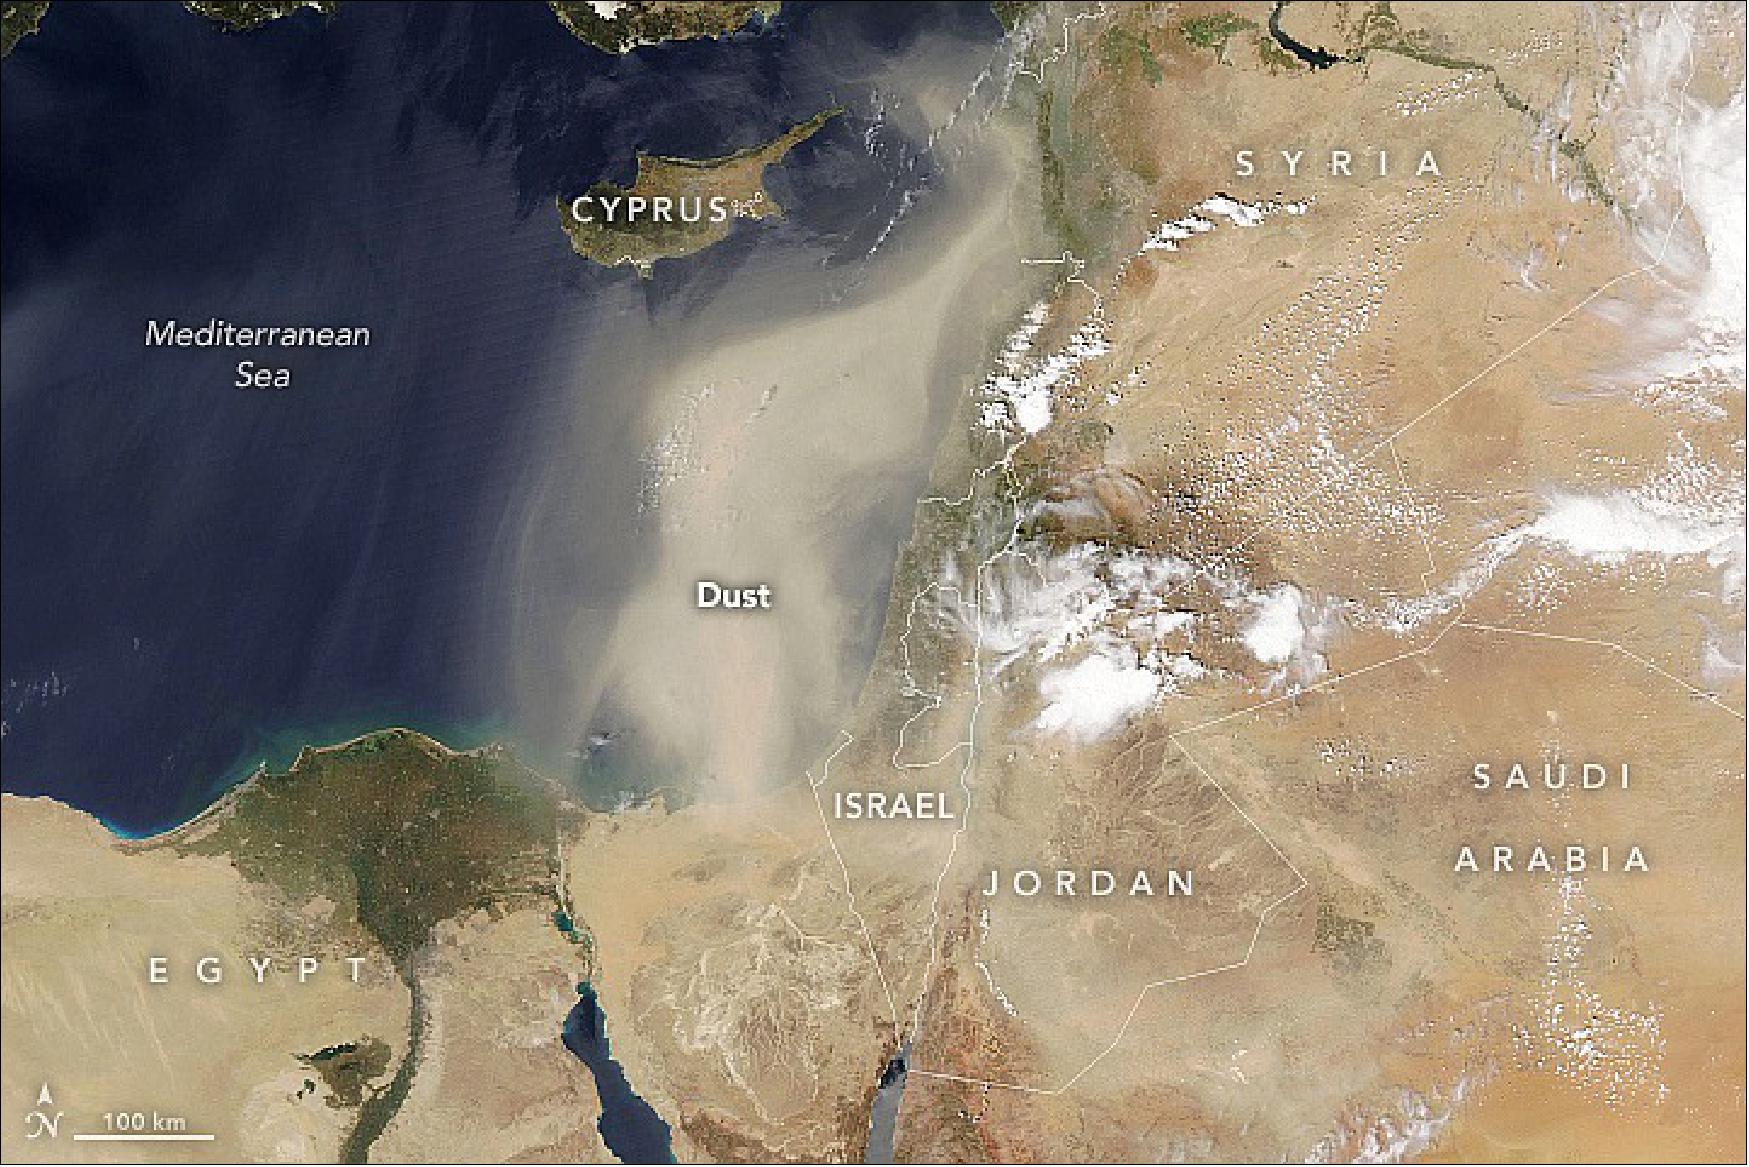 Figure 24: A dust storm over the Eastern Mediterranean was accompanied by thunderstorms that also brought hail and flash floods. The dust is visible drifting over the eastern Mediterranean in this image, acquired on April 24 by the MODIS instrument on NASA’s Aqua satellite (image credit: NASA Earth Observatory image by Lauren Dauphin, using MODIS data from NASA EOSDIS LANCE and GIBS/Worldview. Story by Sara E. Pratt)